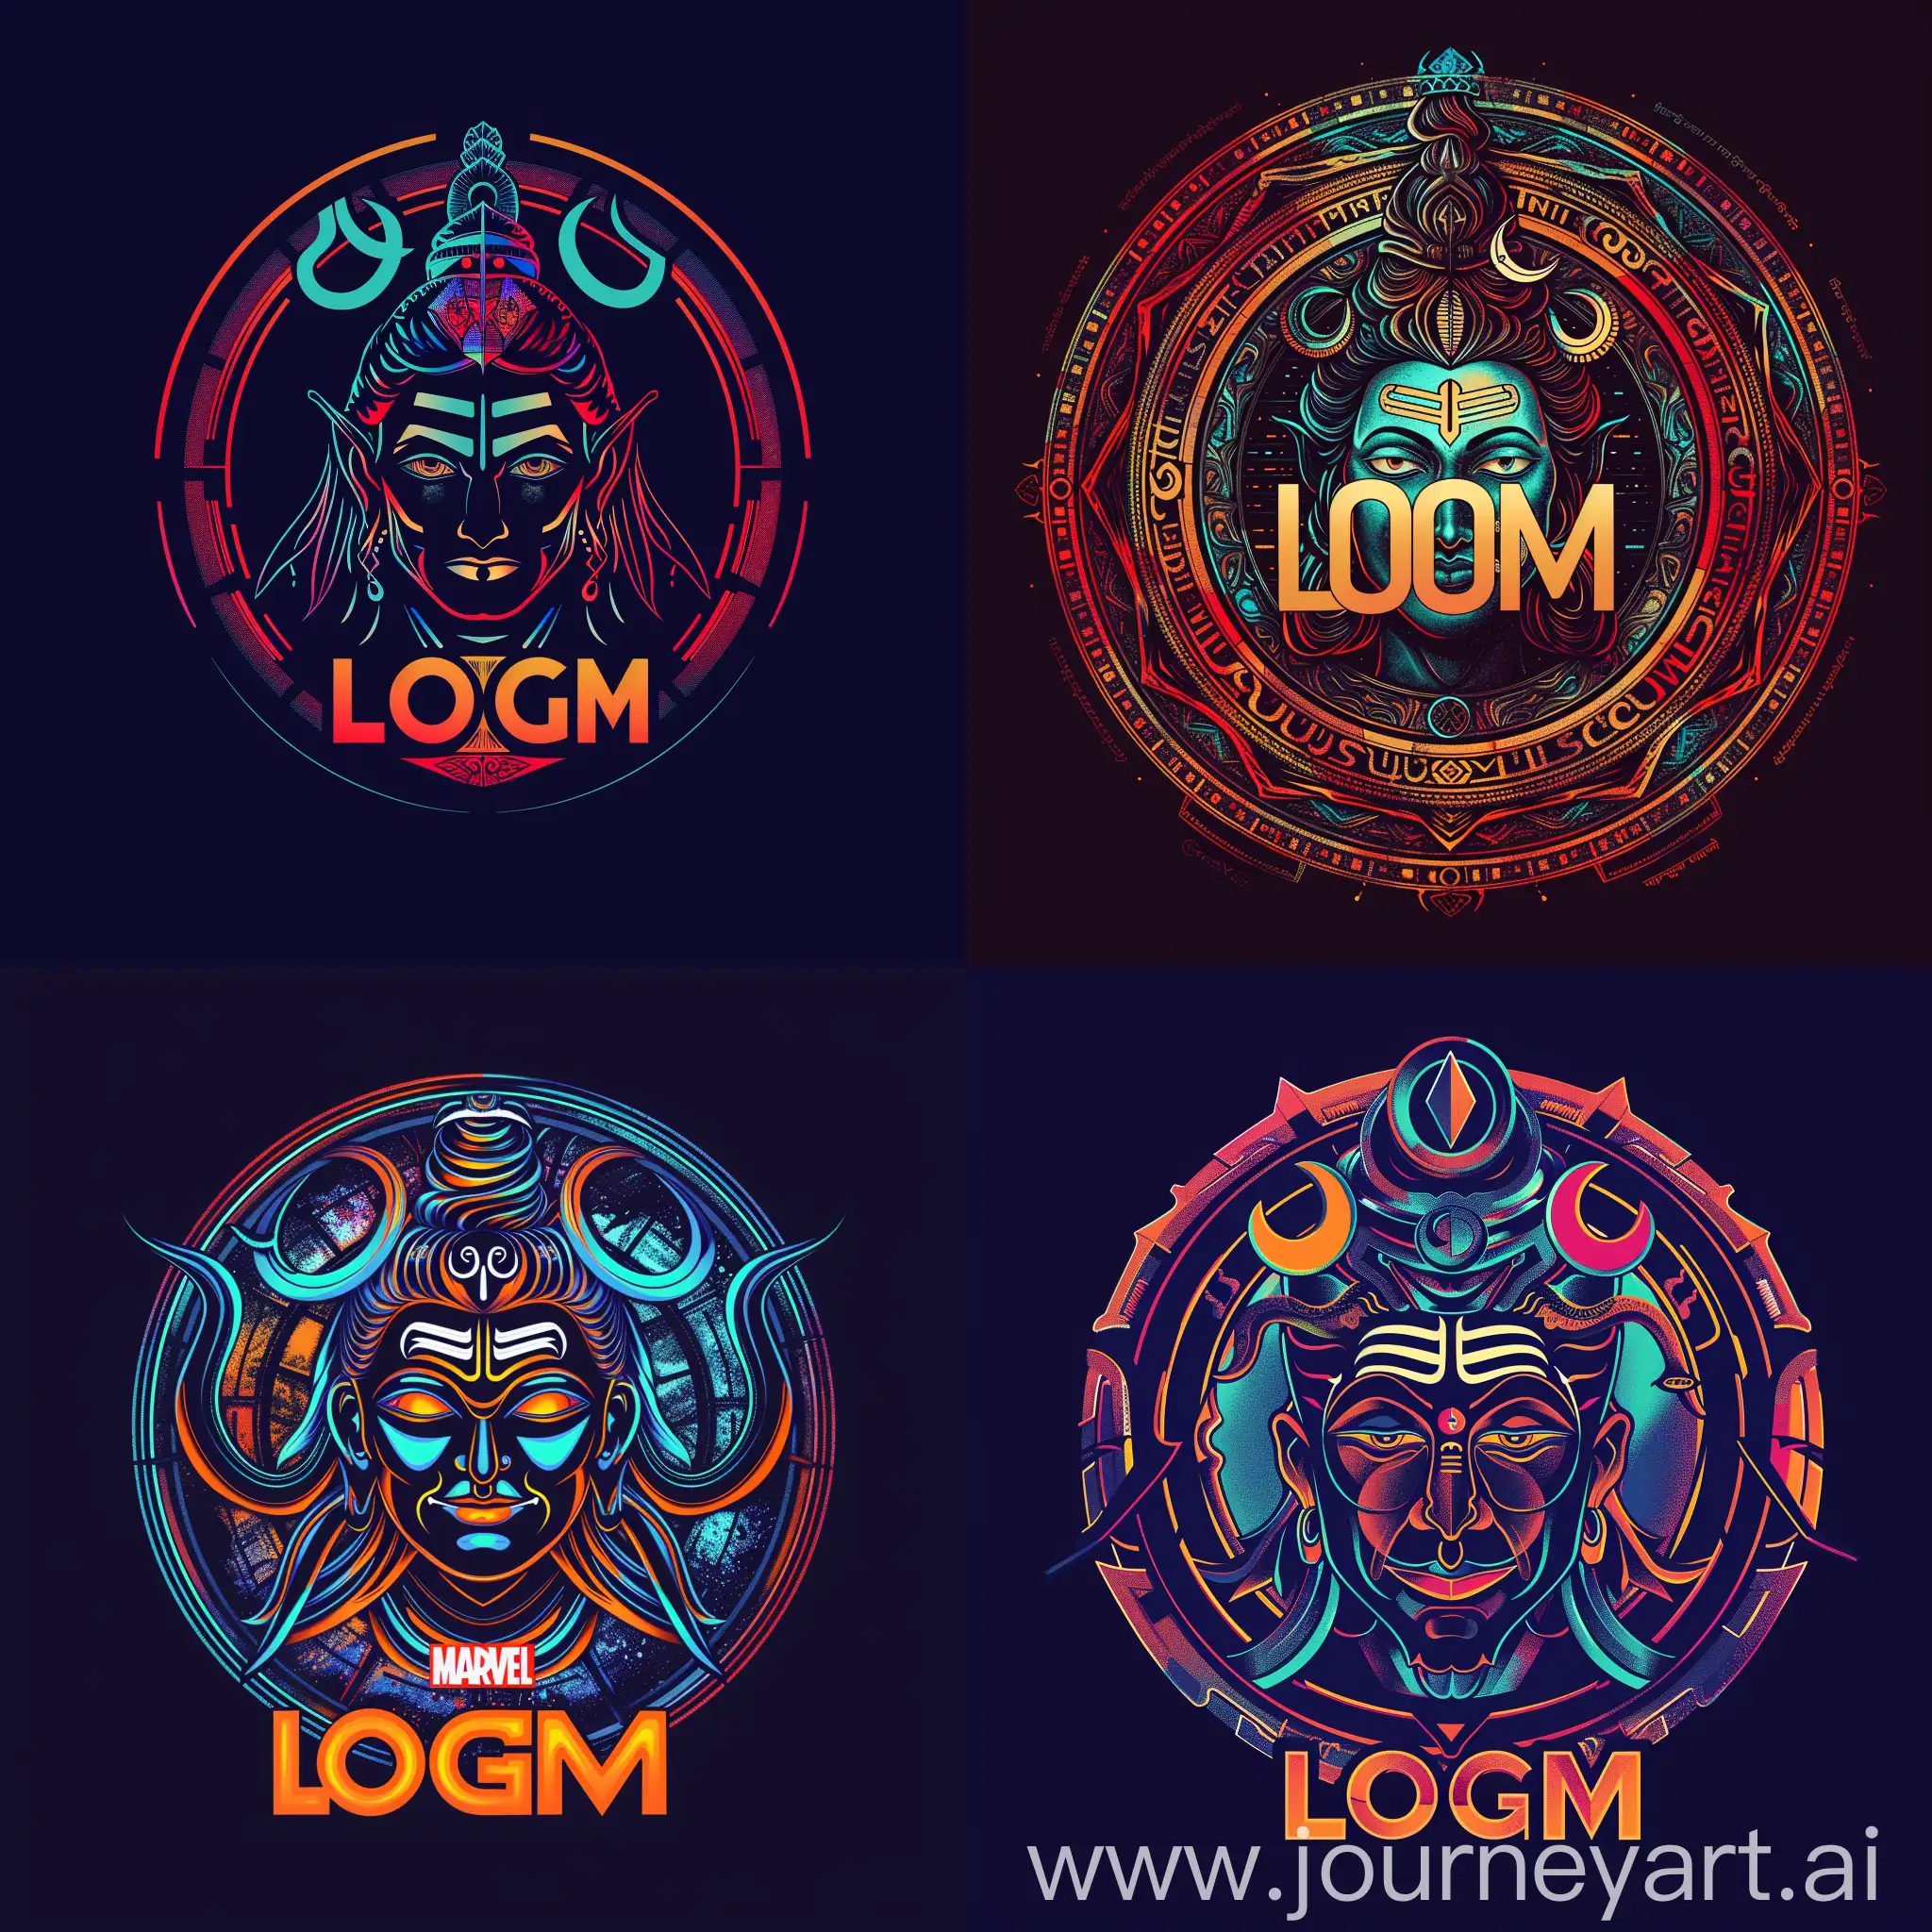 make logo of name LOGM . It has a circular shape with panchamukhi shiva  god form. The face has vibuthi with trishul representing power. The logo is also stylized with inspirations from avengers theme, using the same colors and font as the marvel saga., in the style of suprematism, kaleidoscopic.Cinematic Approach towards Visualization of Lord Shiva Reimagined in Midjourney V6.
